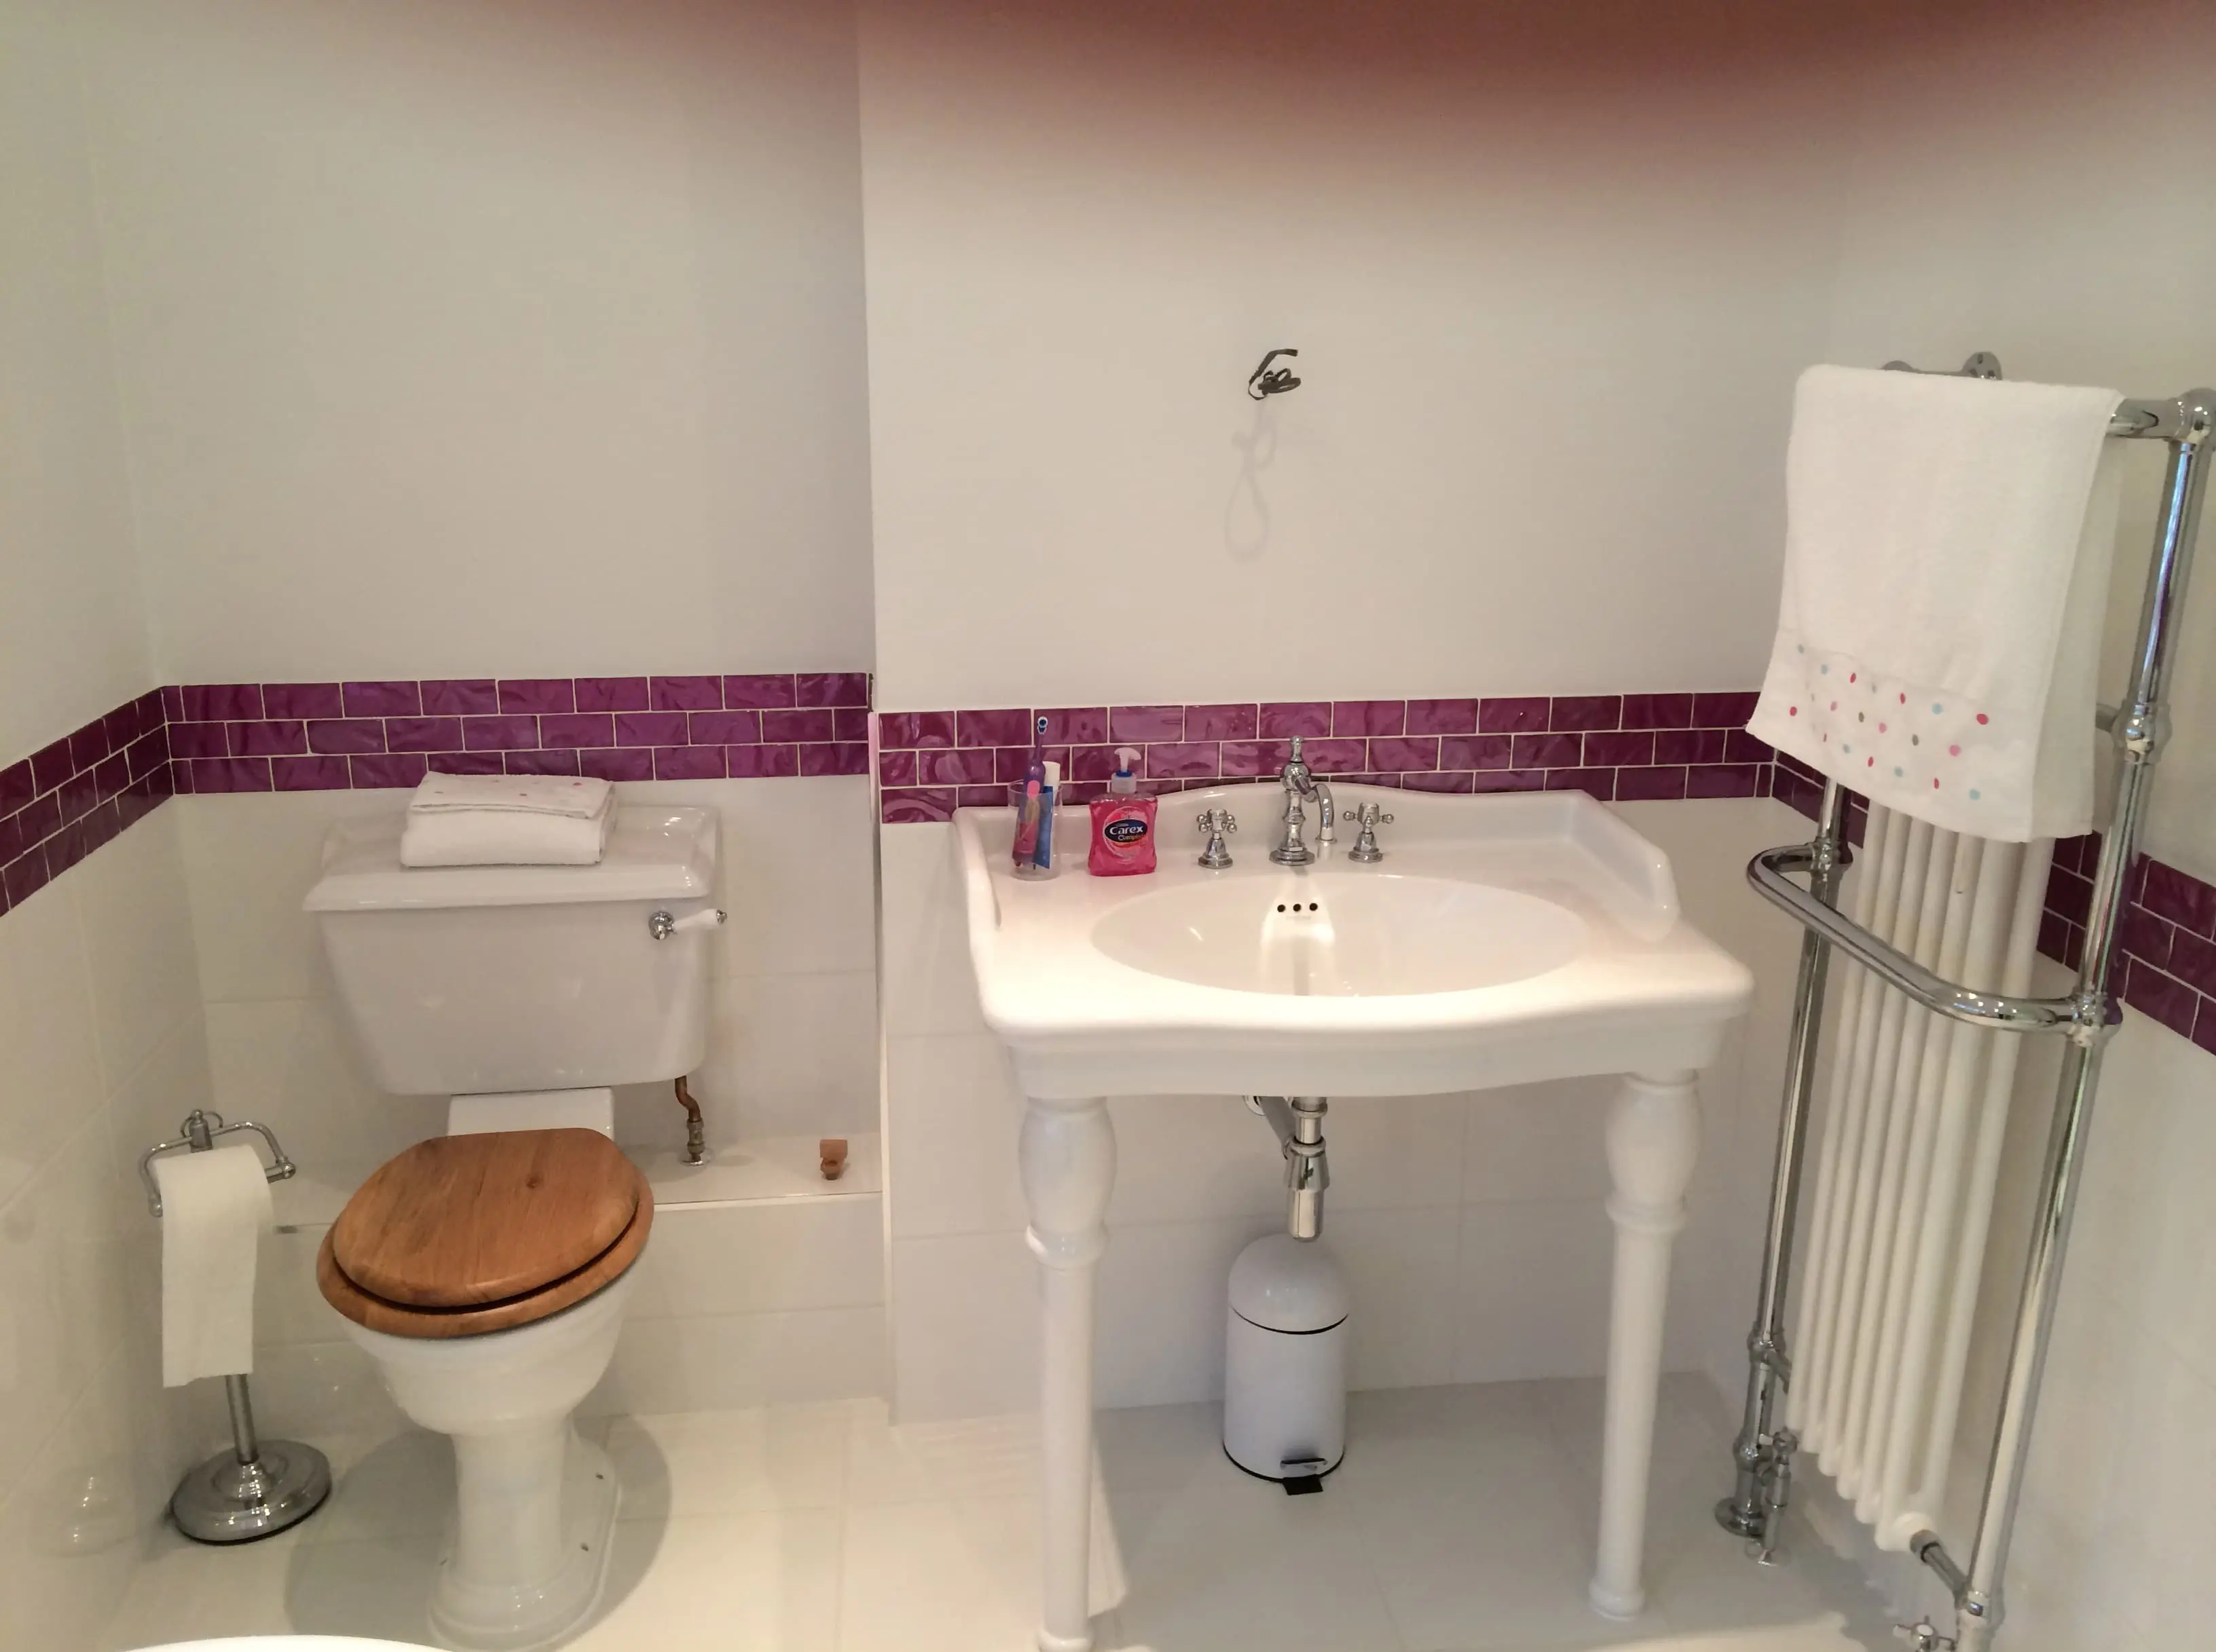 At Plumbing 4 U, we can tailor our tiling services&nbsp;to suit your budget.The team are fully qualified, with over 40 years of experience in the tiling industry, so you can be sure you are in good hands.&nbsp;In addition to tiling, we also offer plumbing and&nbsp;bathroom&nbsp;installations.Why not give us a&nbsp;call today to discuss your requirements for&nbsp;tiling services in Sonning?